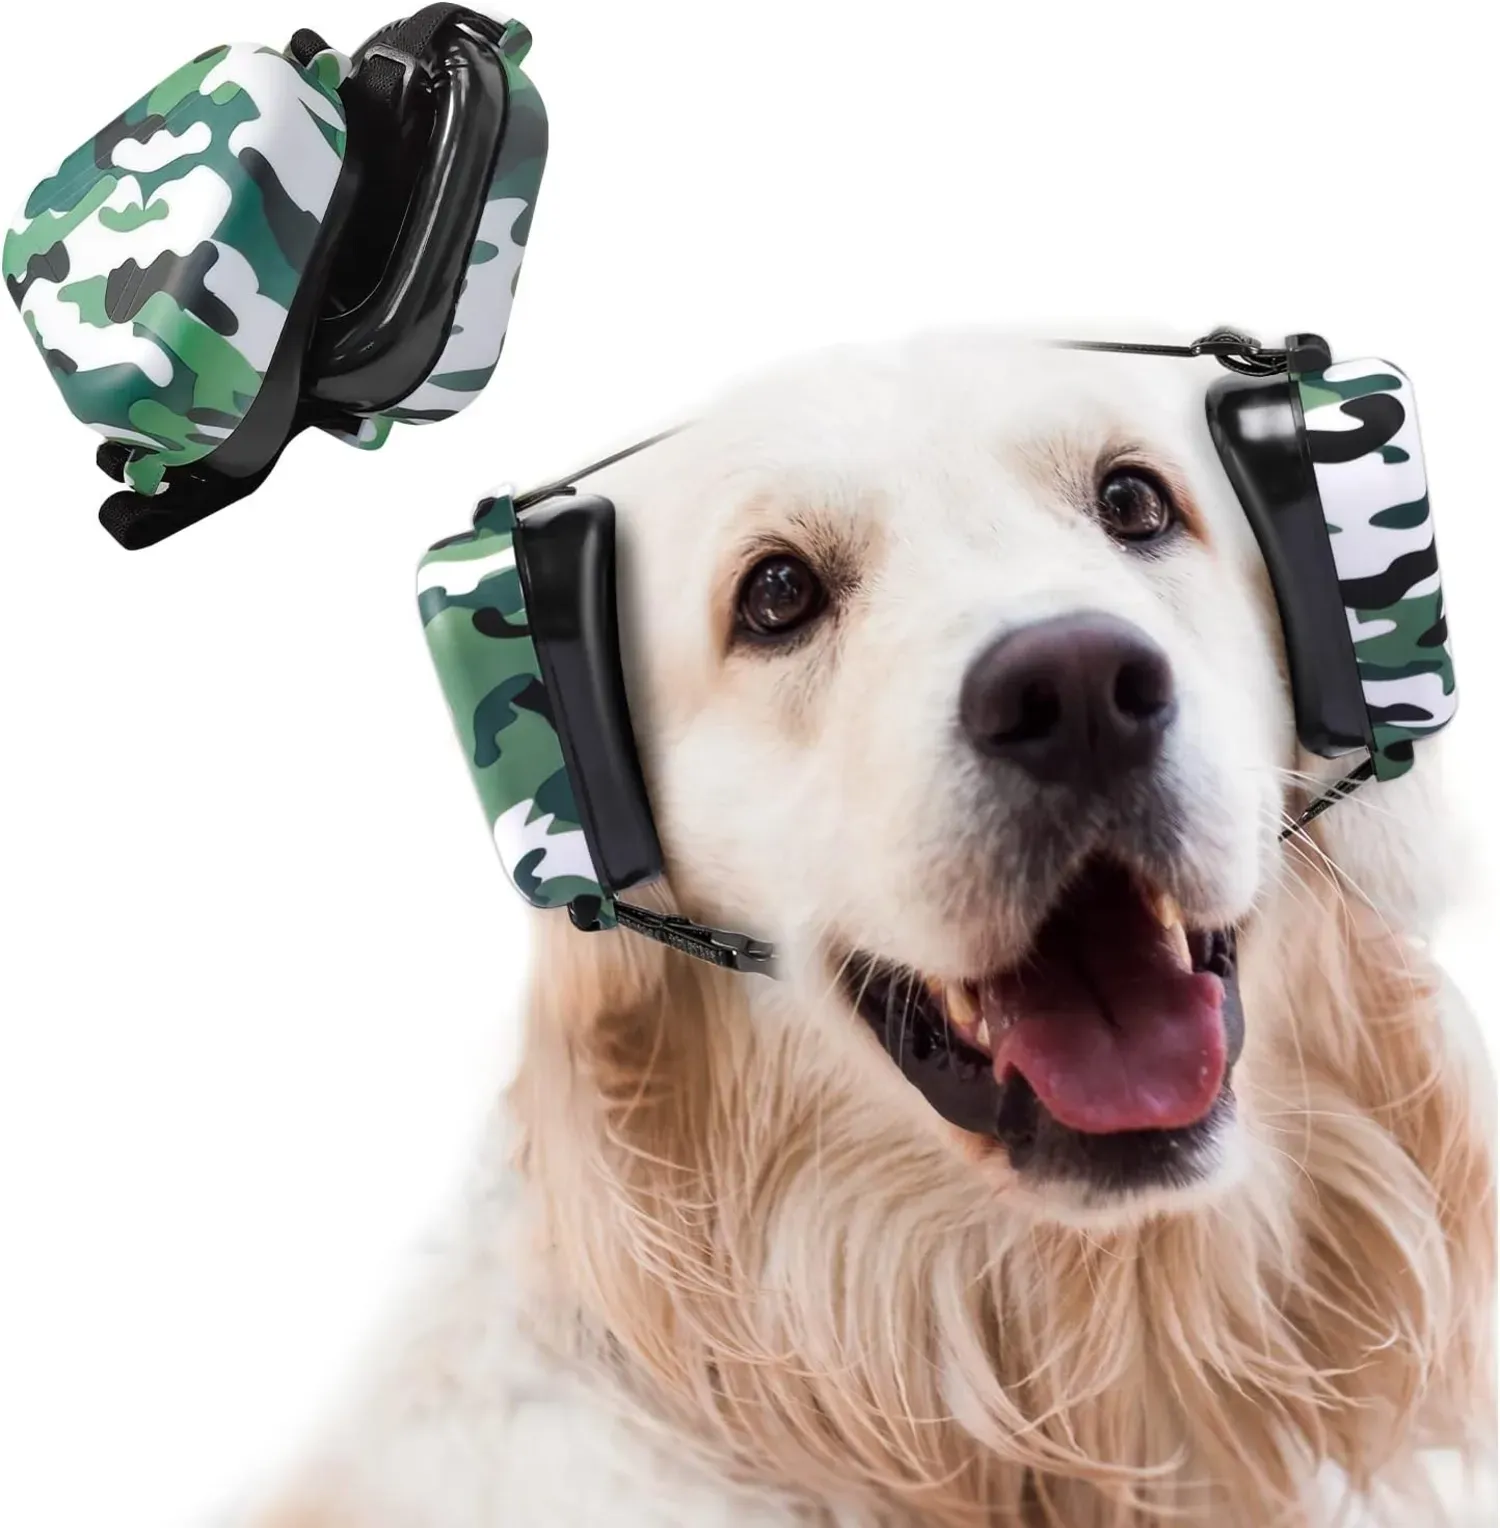 The Secret to a Tranquil Tail-Wagger? Introducing Dog Noise-Canceling Headphones